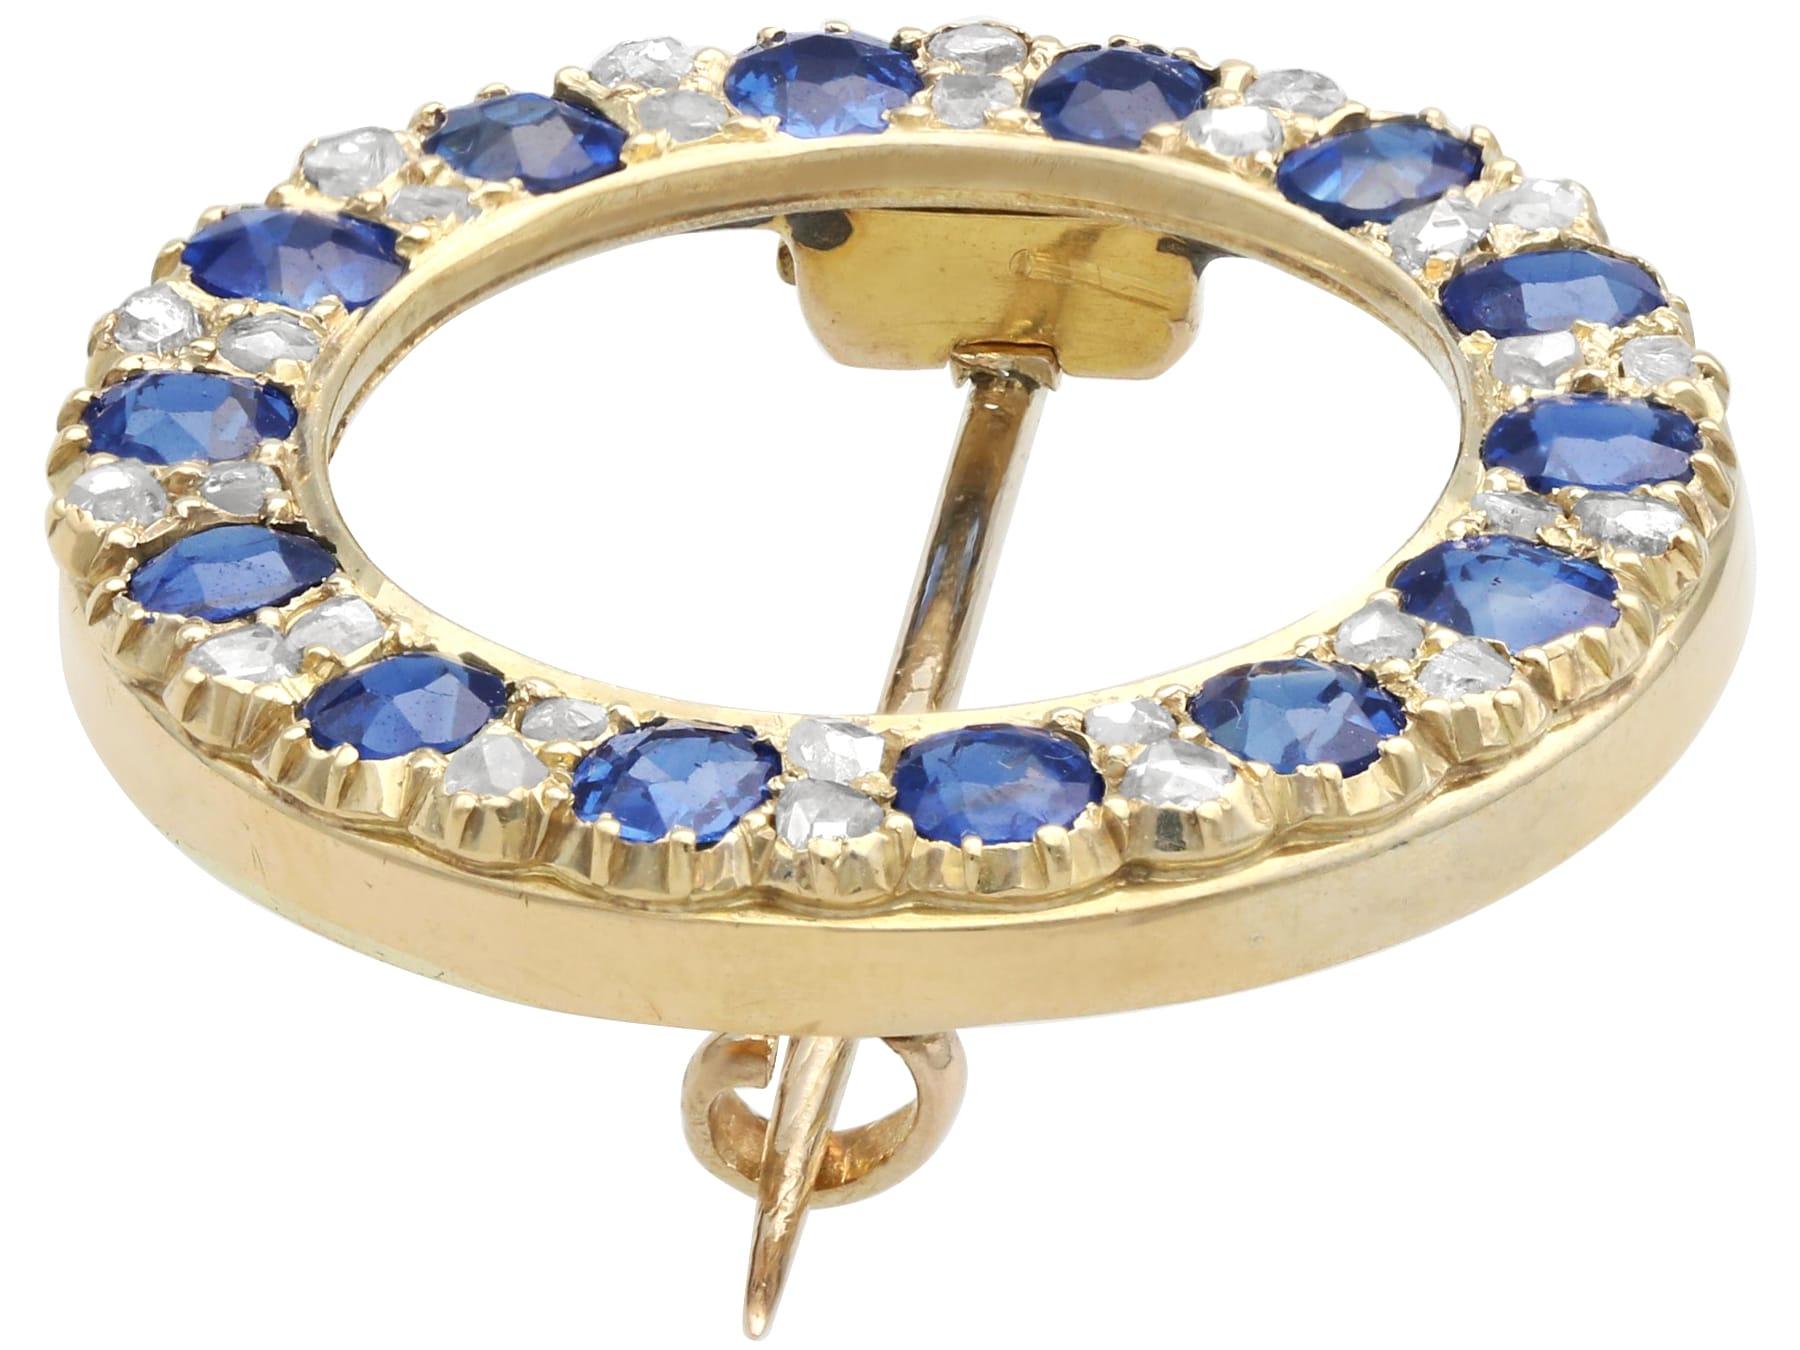 Oval Cut Antique Victorian 3.36 Carat Sapphire and Diamond Yellow Gold Brooch